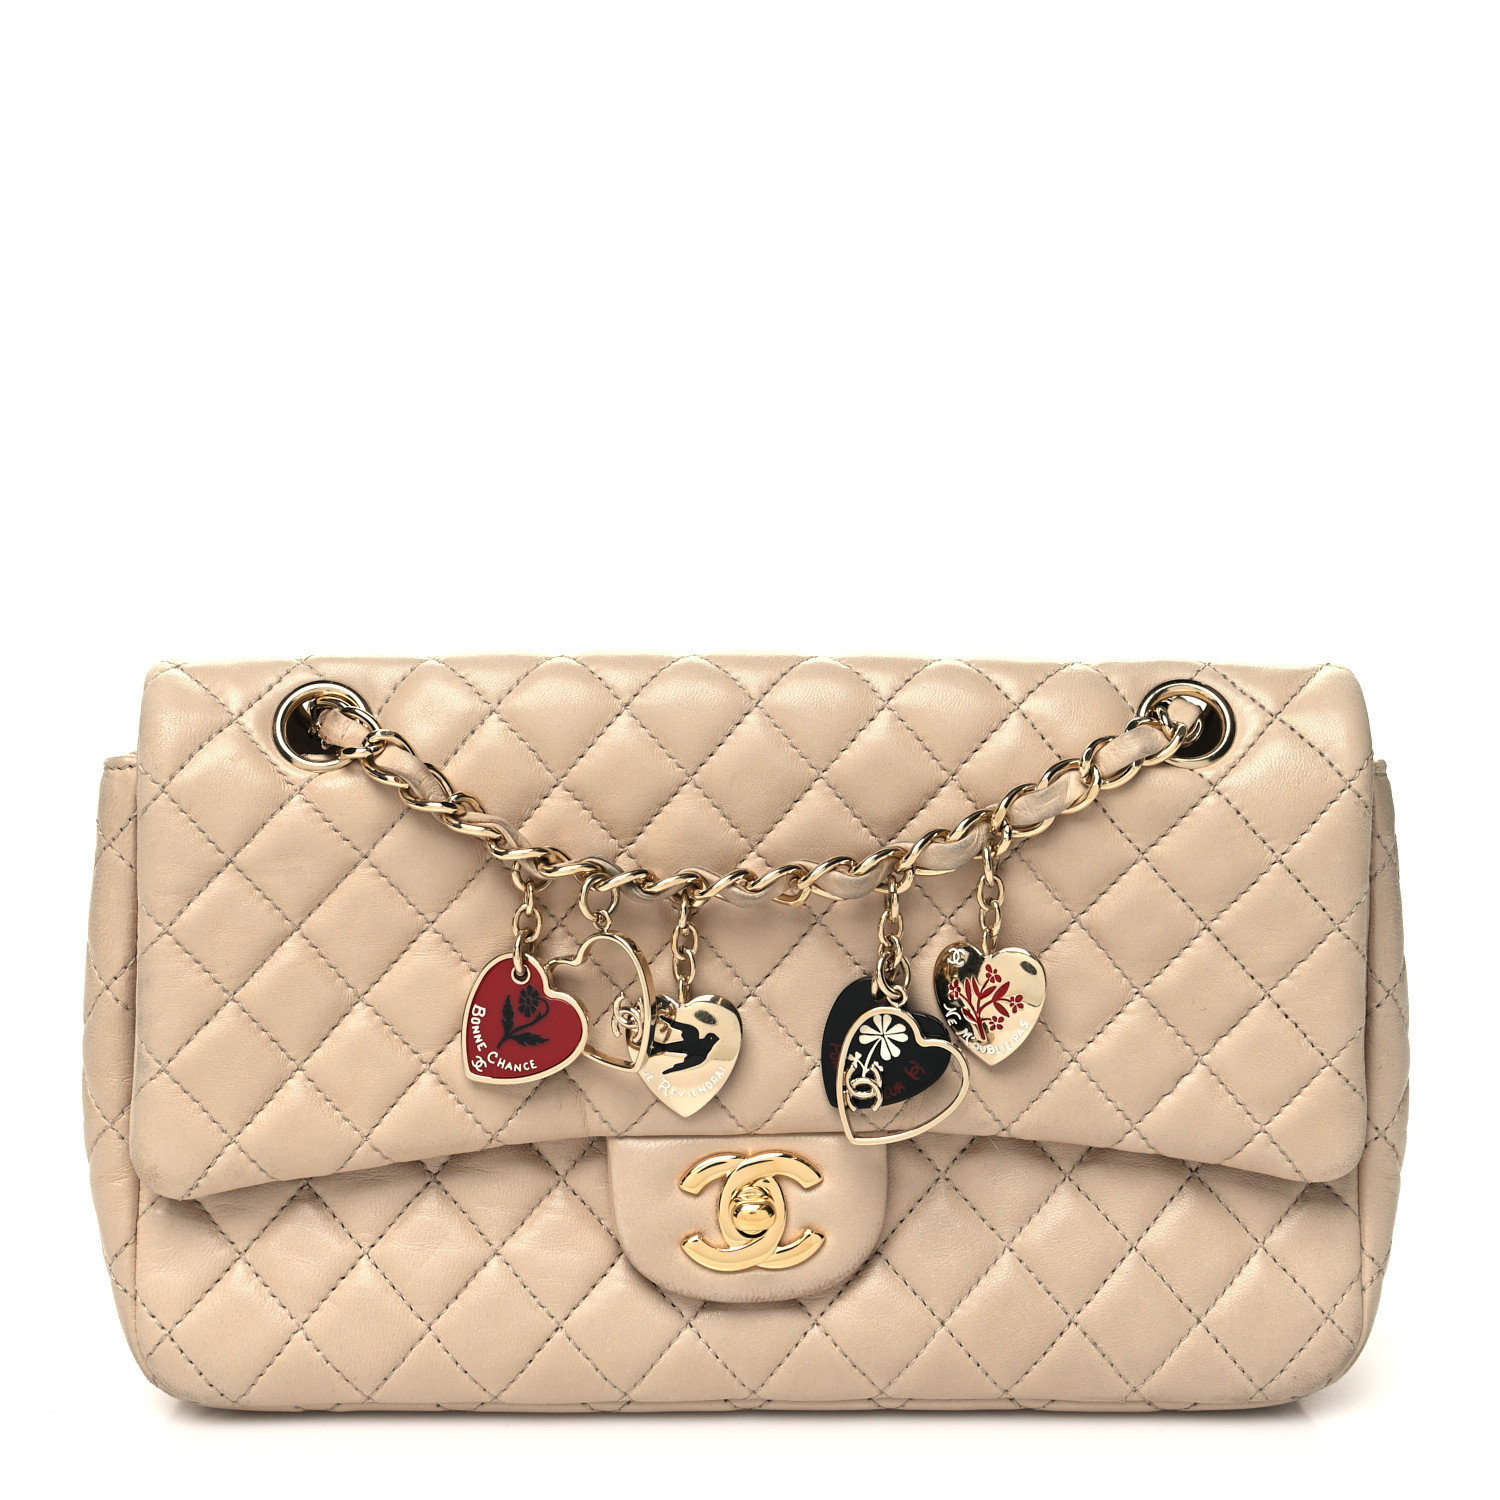 image of CHANEL Lambskin Quilted Valentine Charms Medium Single Flap in the color Beige by FASHIONPHILE